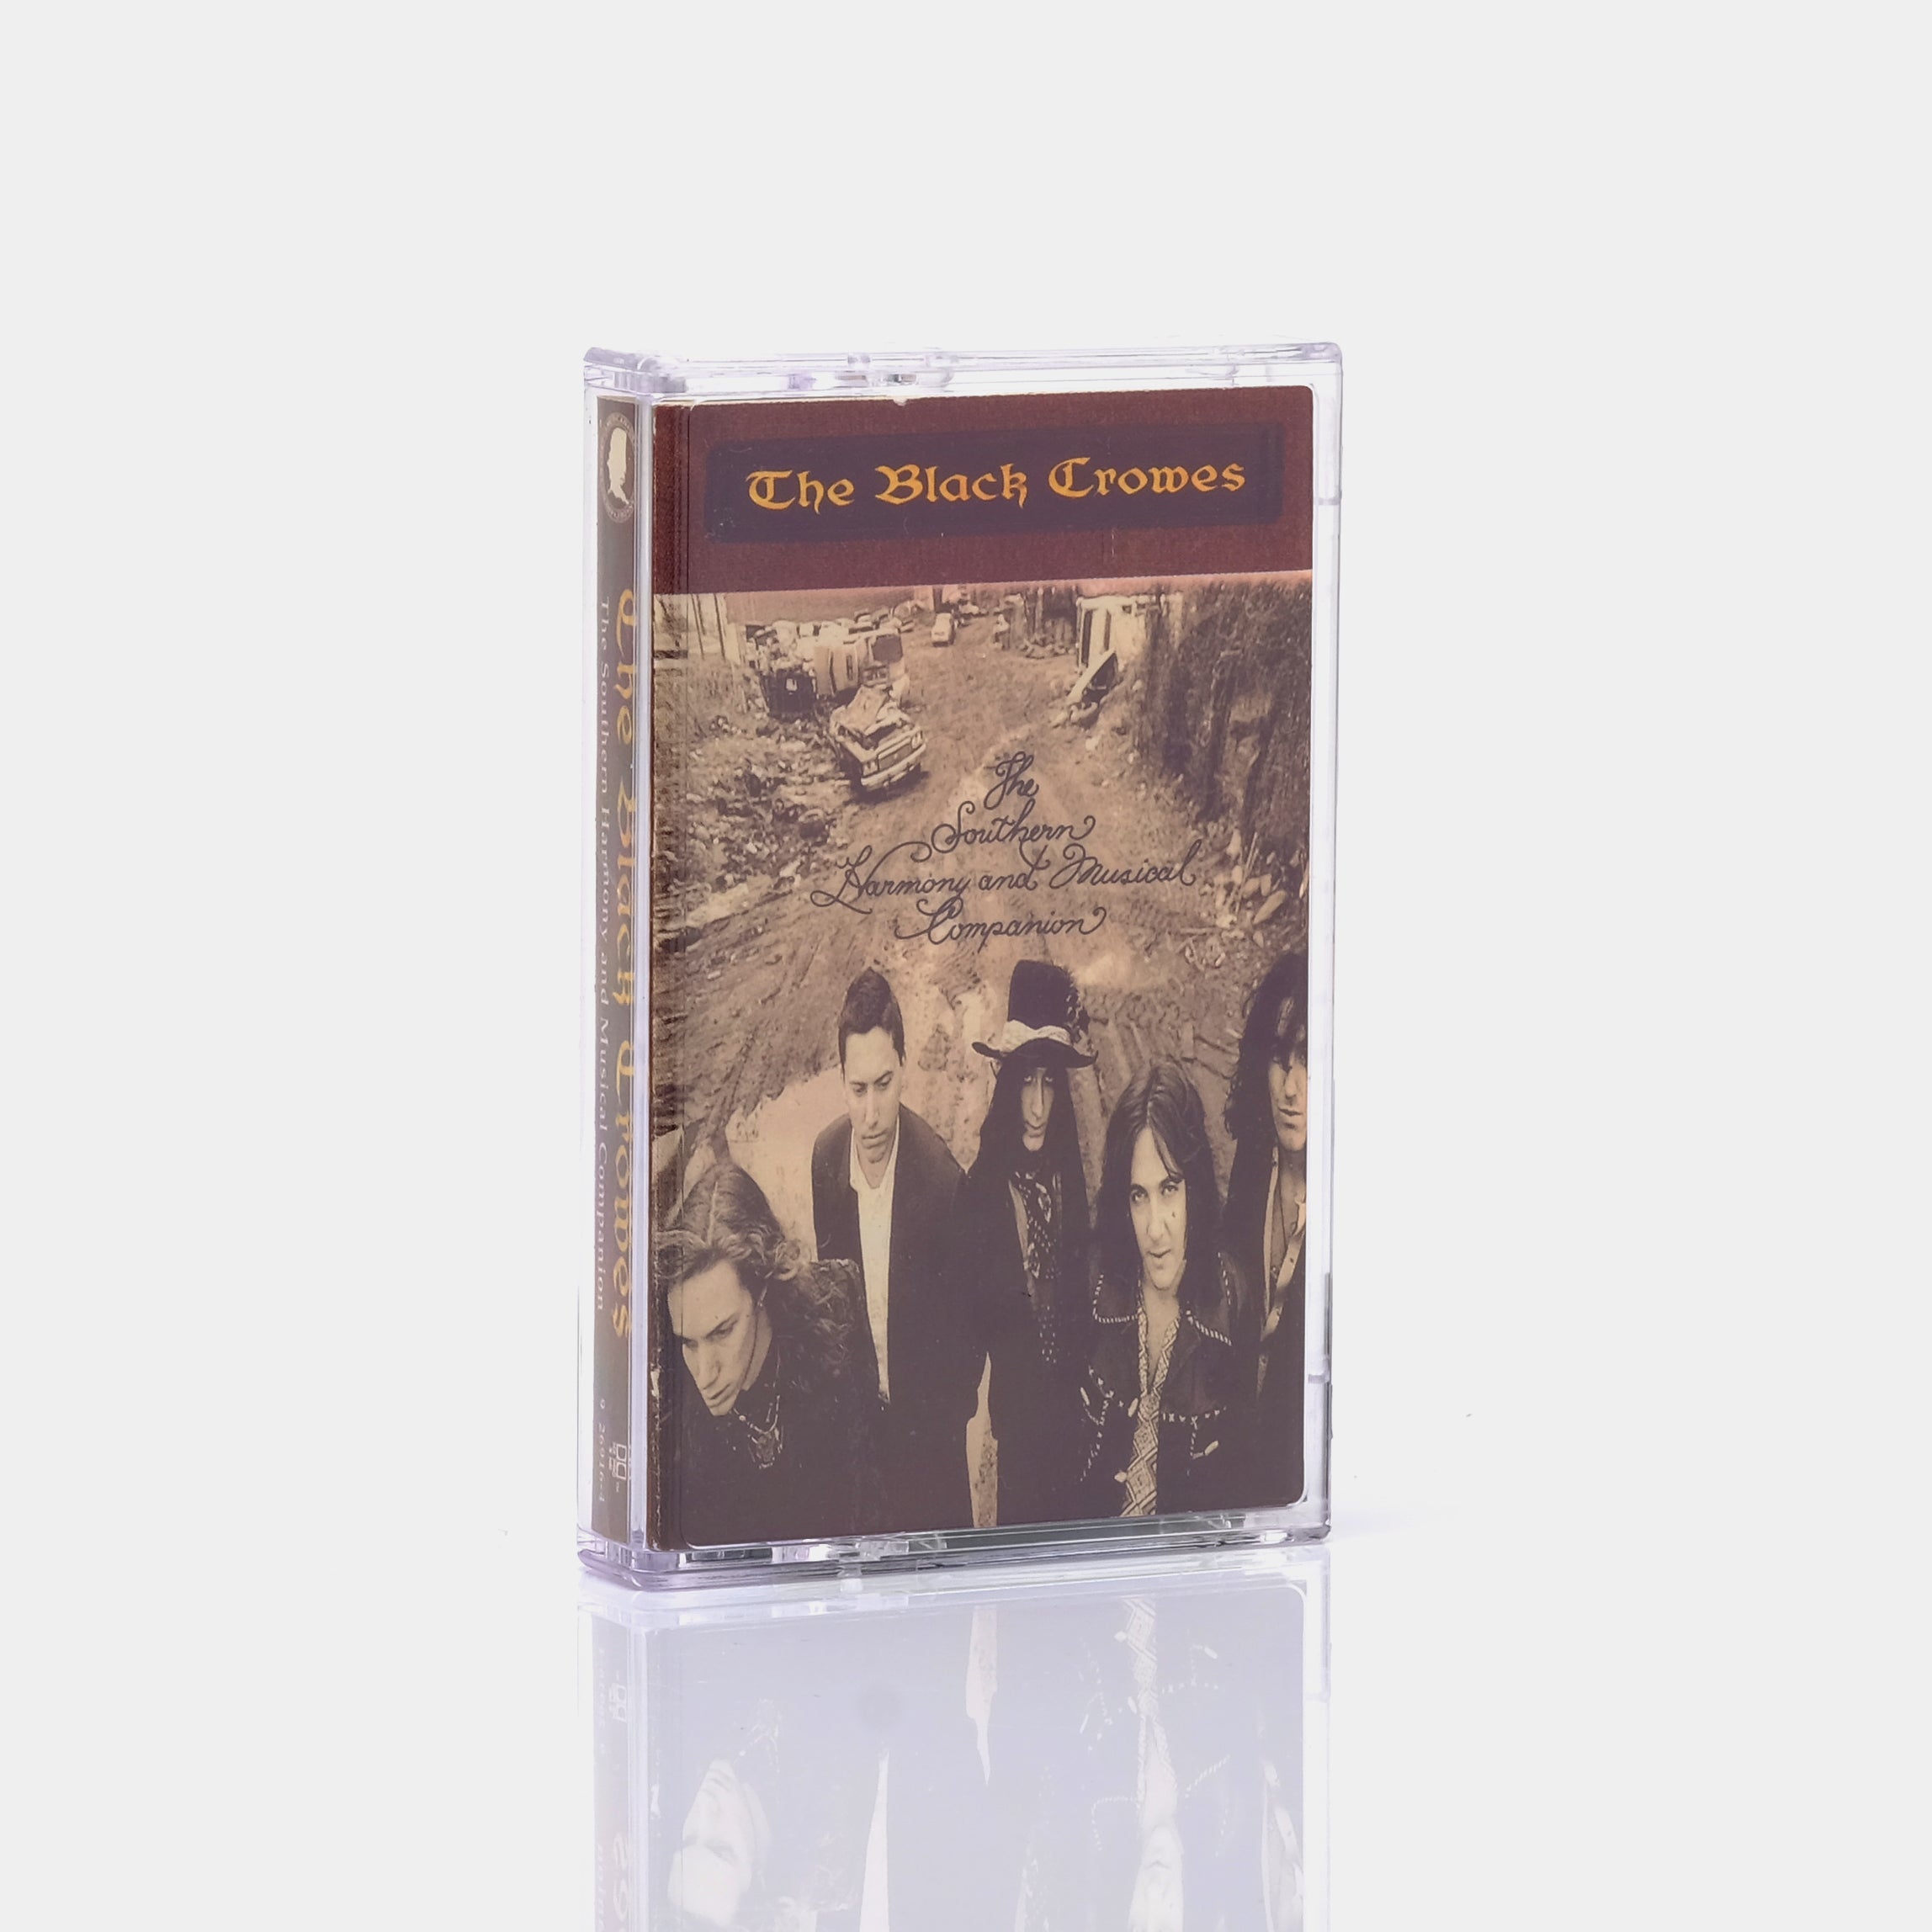 The Black Crowes - The Southern Harmony And Musical Companion Cassette Tape